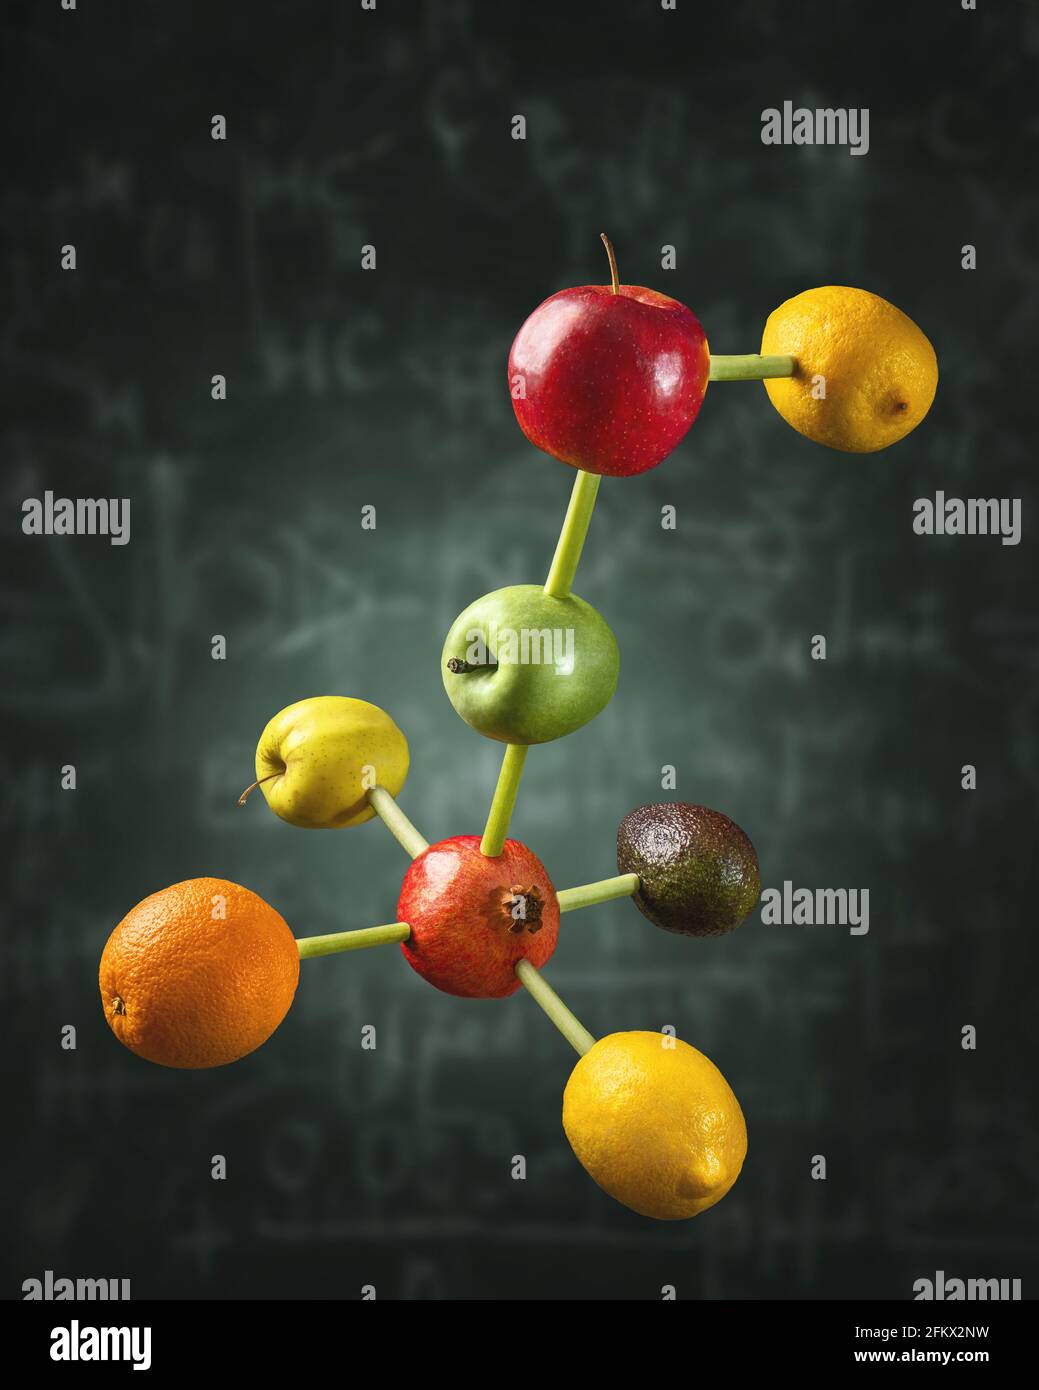 Connected fruits in the shape of molecular structure chain. Concept for vitamins diet or healthy natural food formula. Stock Photo